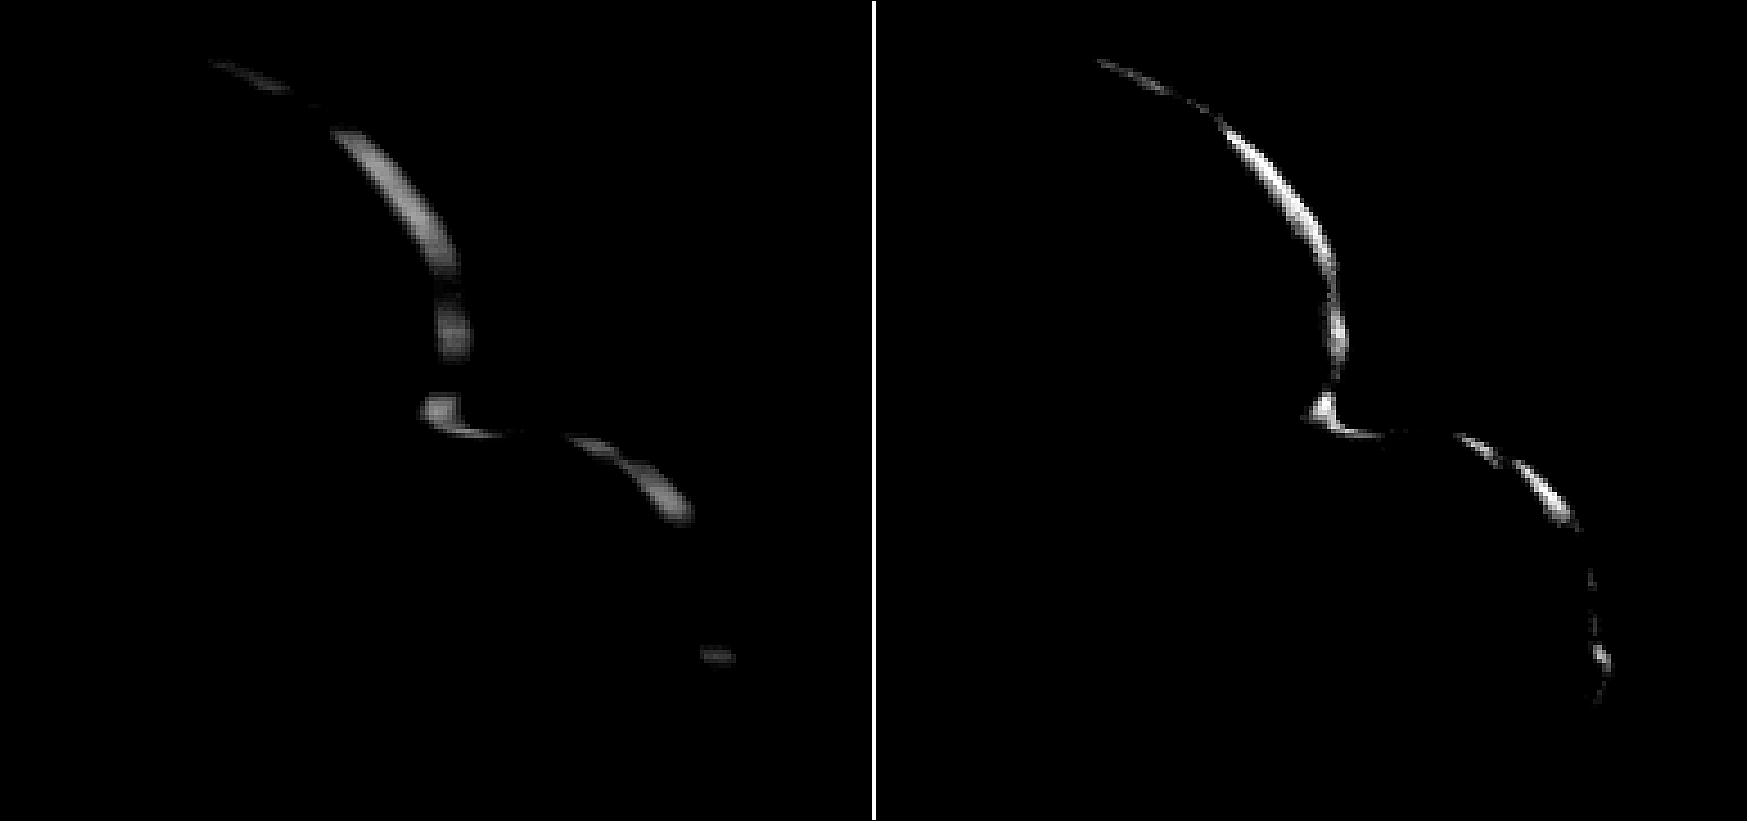 Figure 39: The Crescent View: New Horizons took this image of the Kuiper Belt object 2014 MU69 (nicknamed Ultima Thule) on Jan. 1, 2019, when the NASA spacecraft was 5,494 miles (8,862 km) beyond it. The image to the left is an "average" of ten images taken by the Long Range Reconnaissance Imager (LORRI); the crescent is blurred in the raw frames because a relatively long exposure time was used during this rapid scan to boost the camera's signal level. Mission scientists have been able to process the image, removing the motion blur to produce a sharper, brighter view of Ultima Thule's thin crescent (image credit: NASA/Johns Hopkins Applied Physics Laboratory/Southwest Research Institute/National Optical Astronomy Observatory)